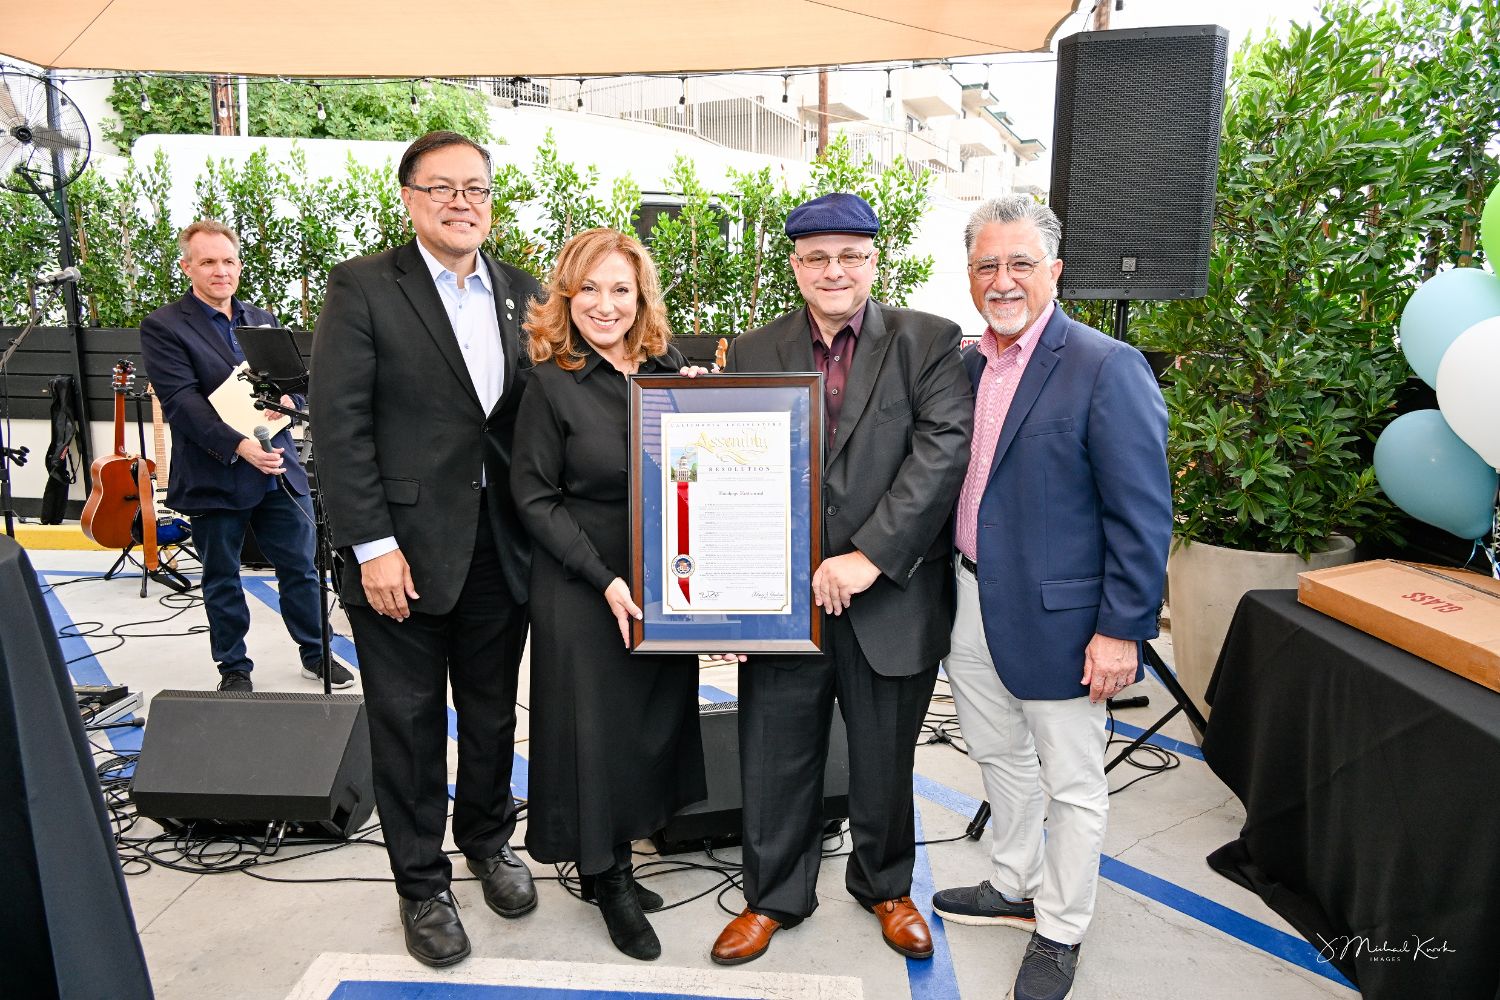 PHOTO: Mike Kwok | The South Pasadenan | Tanya Christos and Greg Mallis (center), Twohey’s Restaurant owners, are presented with a members’ resolution from the state of California legislature by (left to right) Assemblymember Mike Fong, District 49, and State Senator Anthony Portantino, 25th District, at an 80th Anniversary event held at the eatery Sept. 20, 2023.